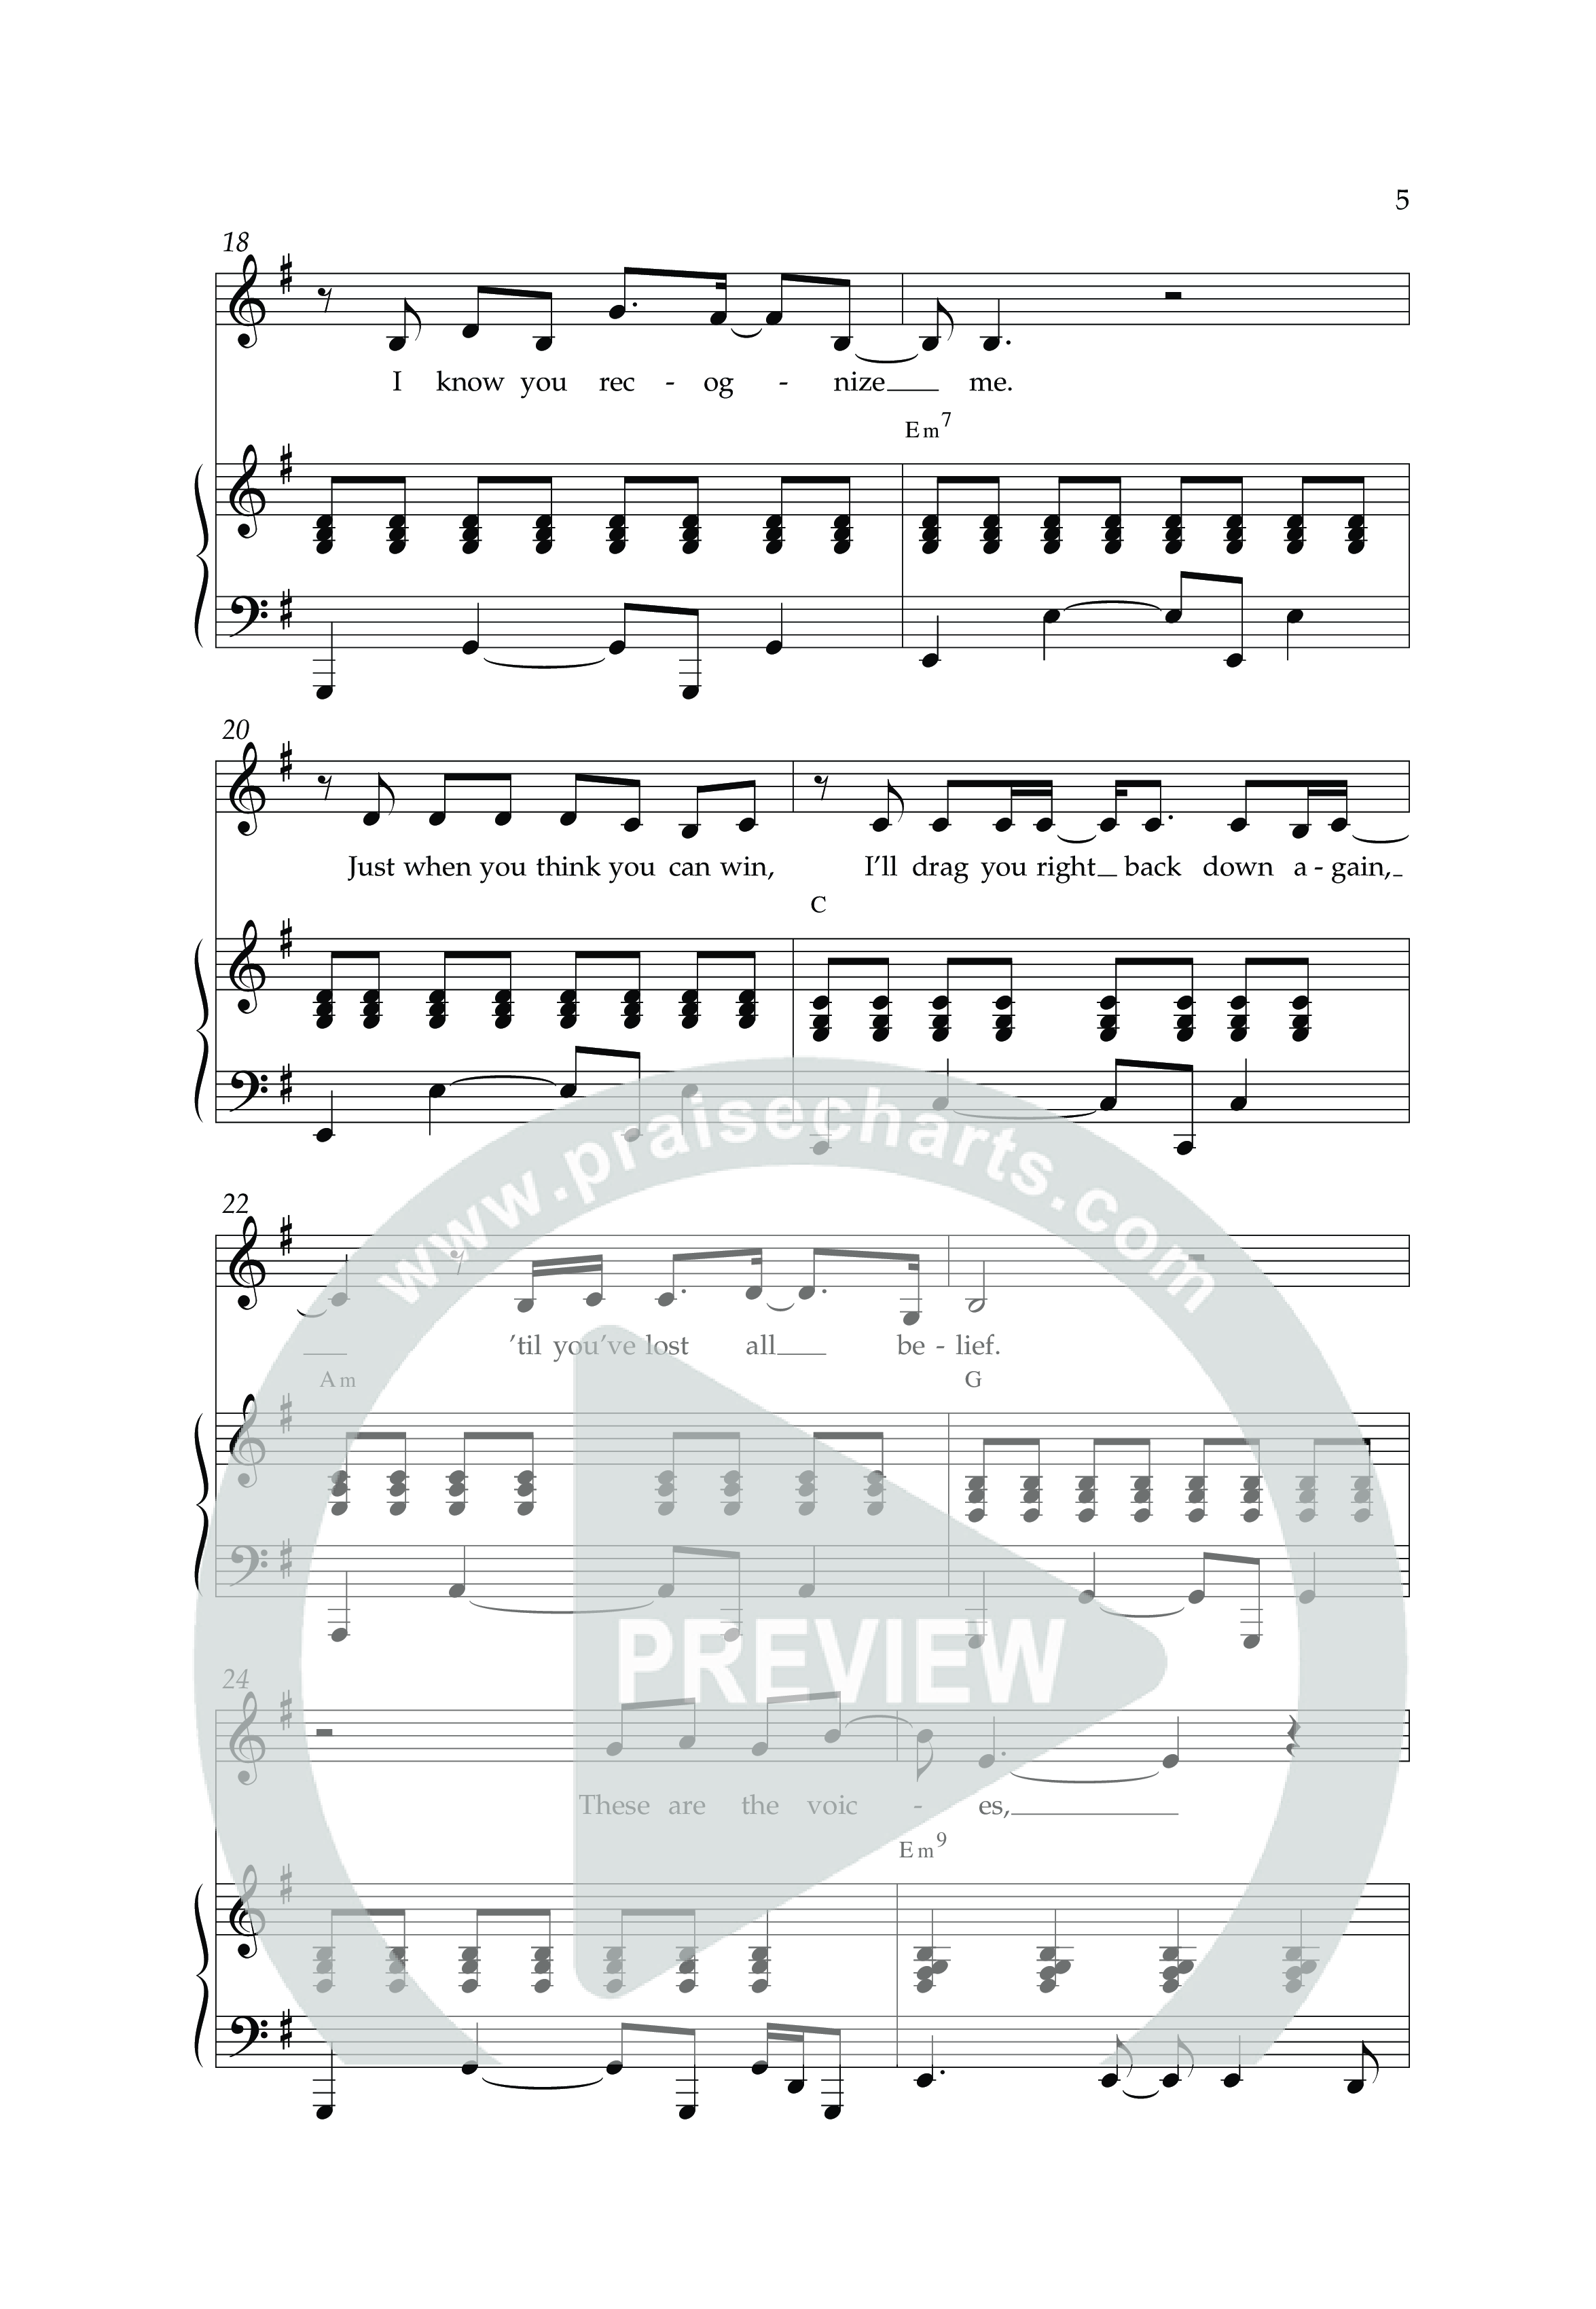 Hello My Name Is (Choral Anthem SATB) Anthem (SATB/Piano) (Lifeway Choral / Arr. Jim Hammerly)